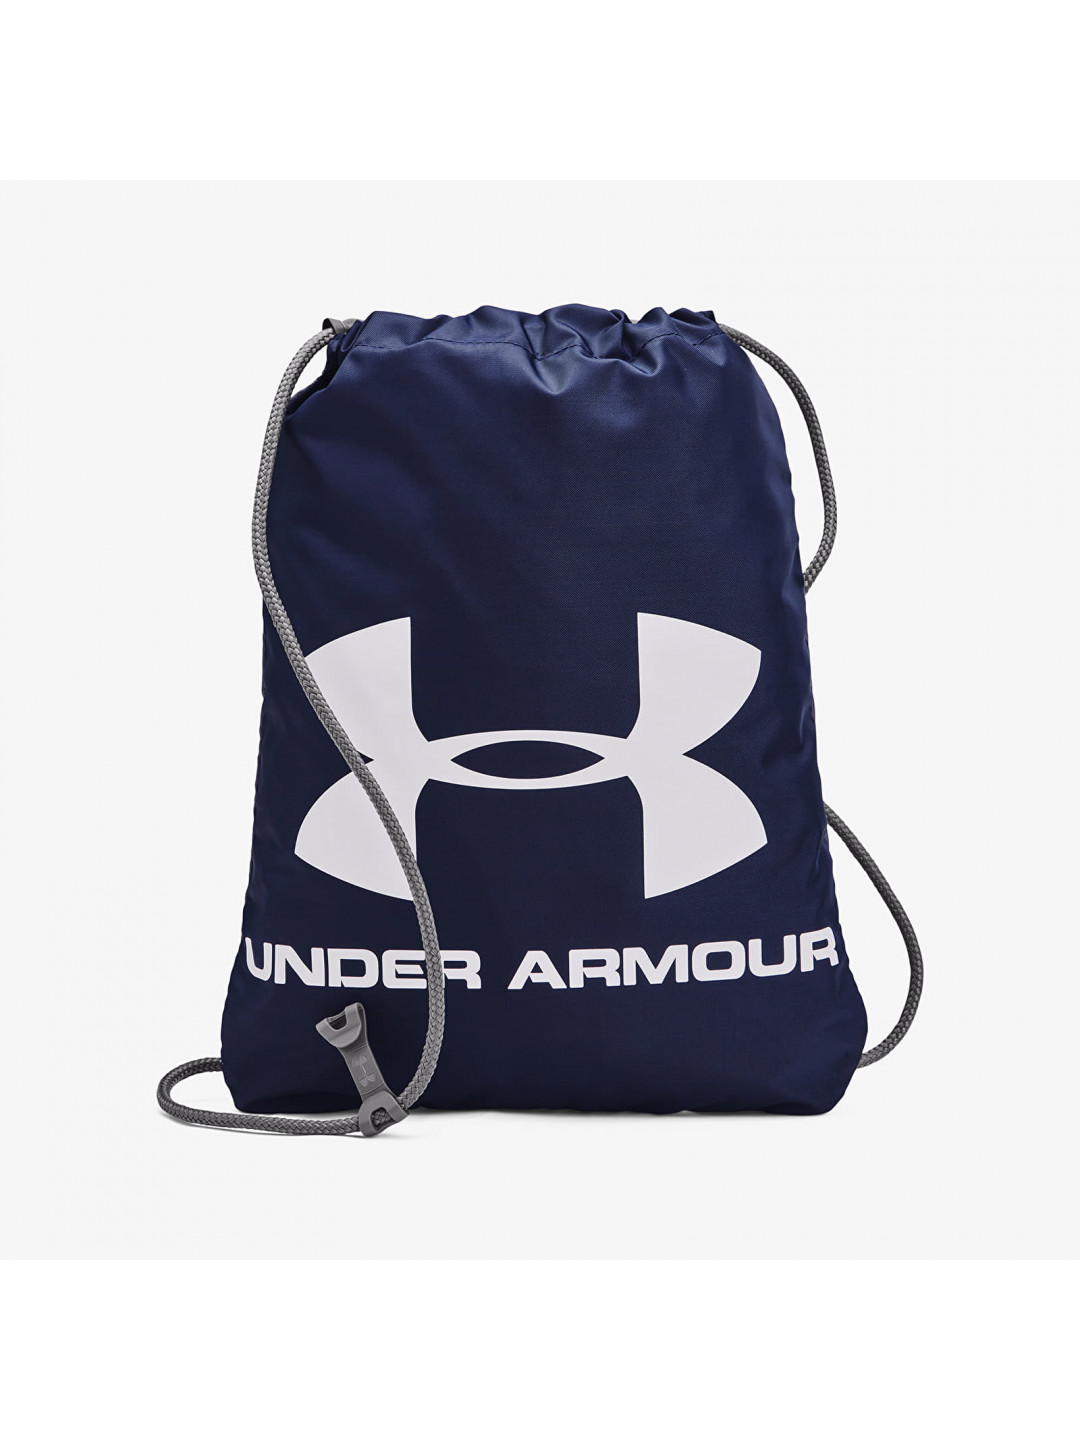 Under Armour Ozsee Sackpack Navy